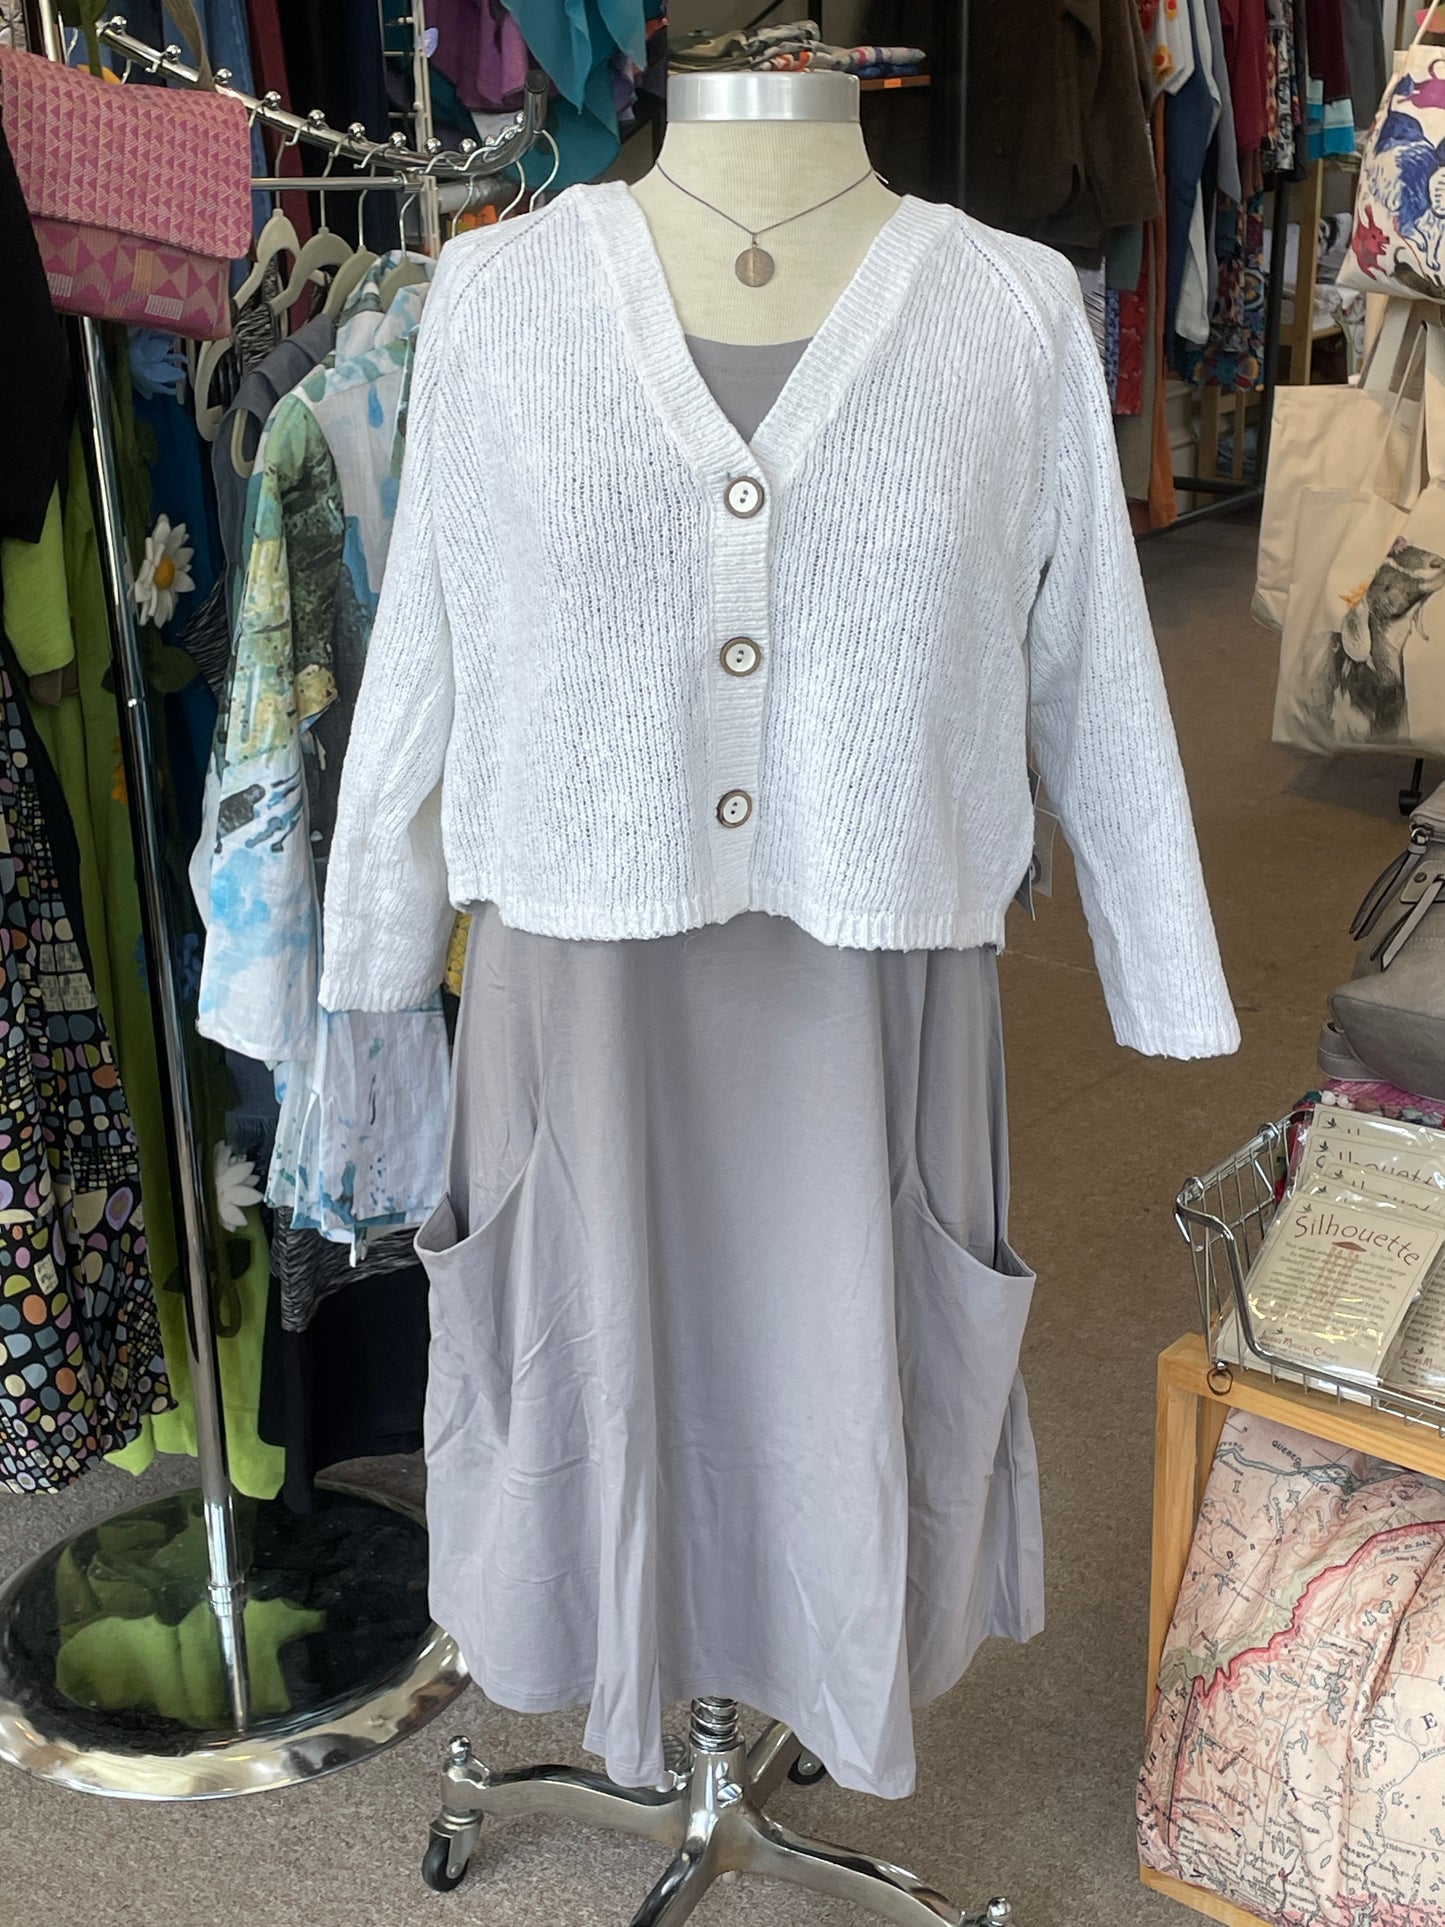 Combed Cotton Artist Dress in Gull by Habitat Clothing